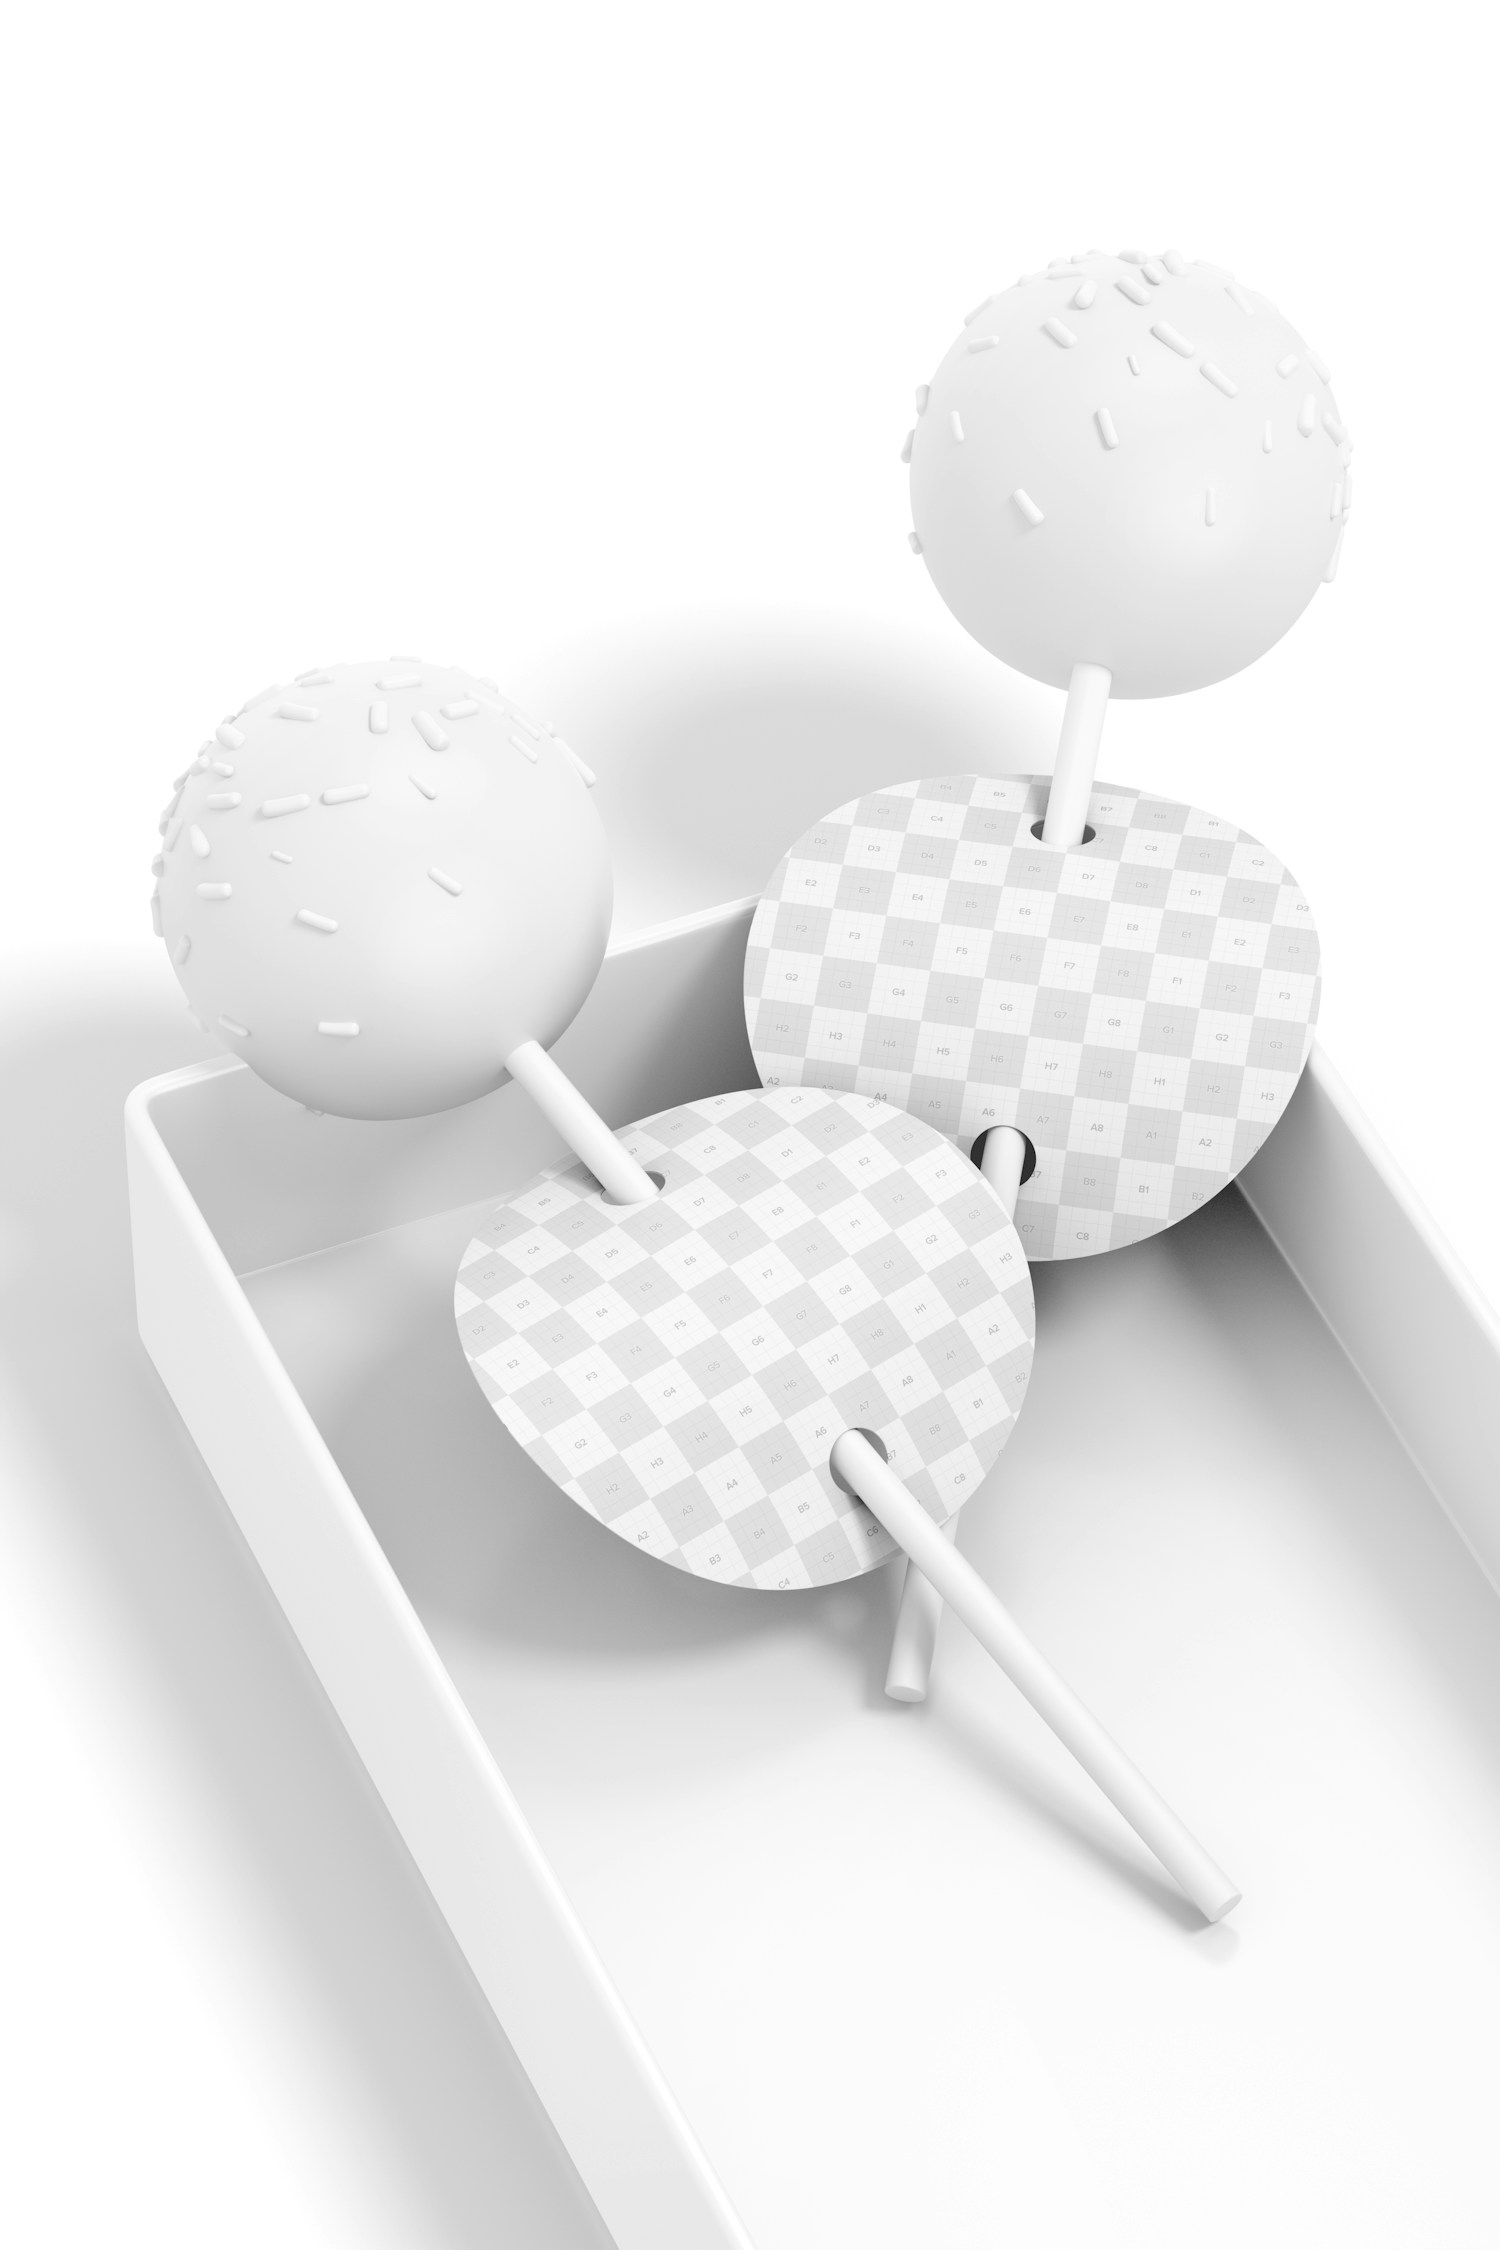 Cake Pops with Tag Mockup, on Tray